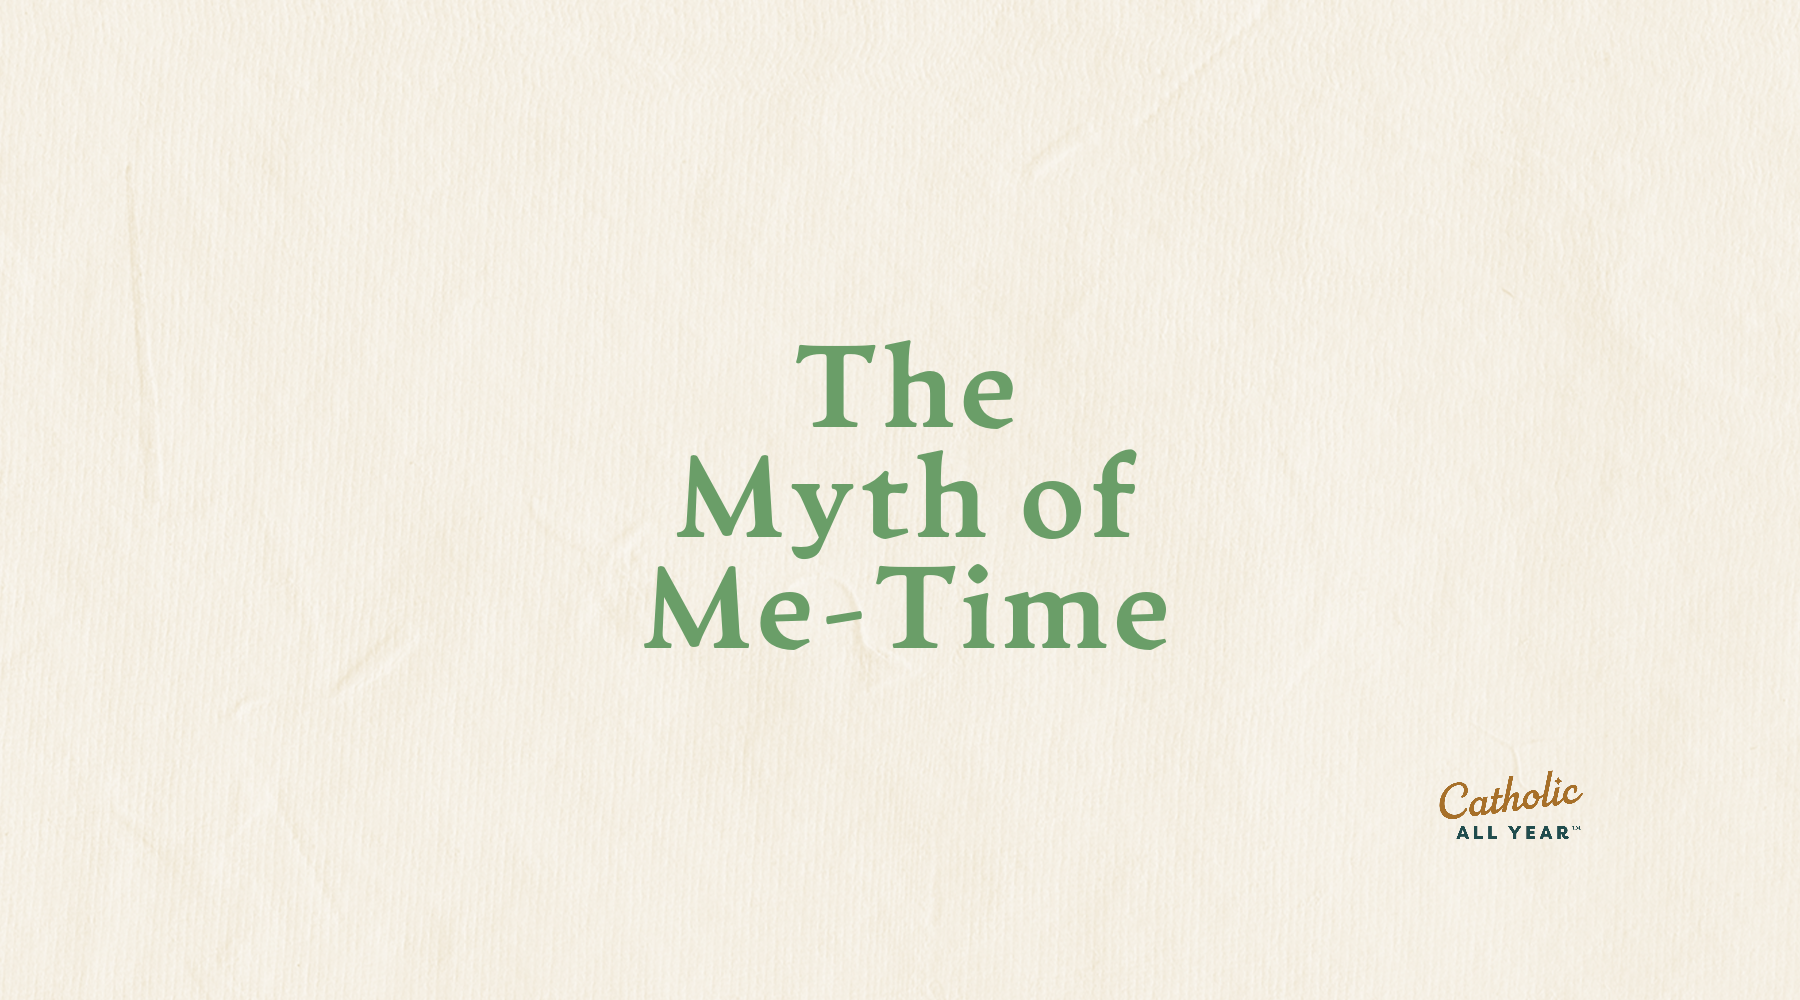 The Myth of Me-Time